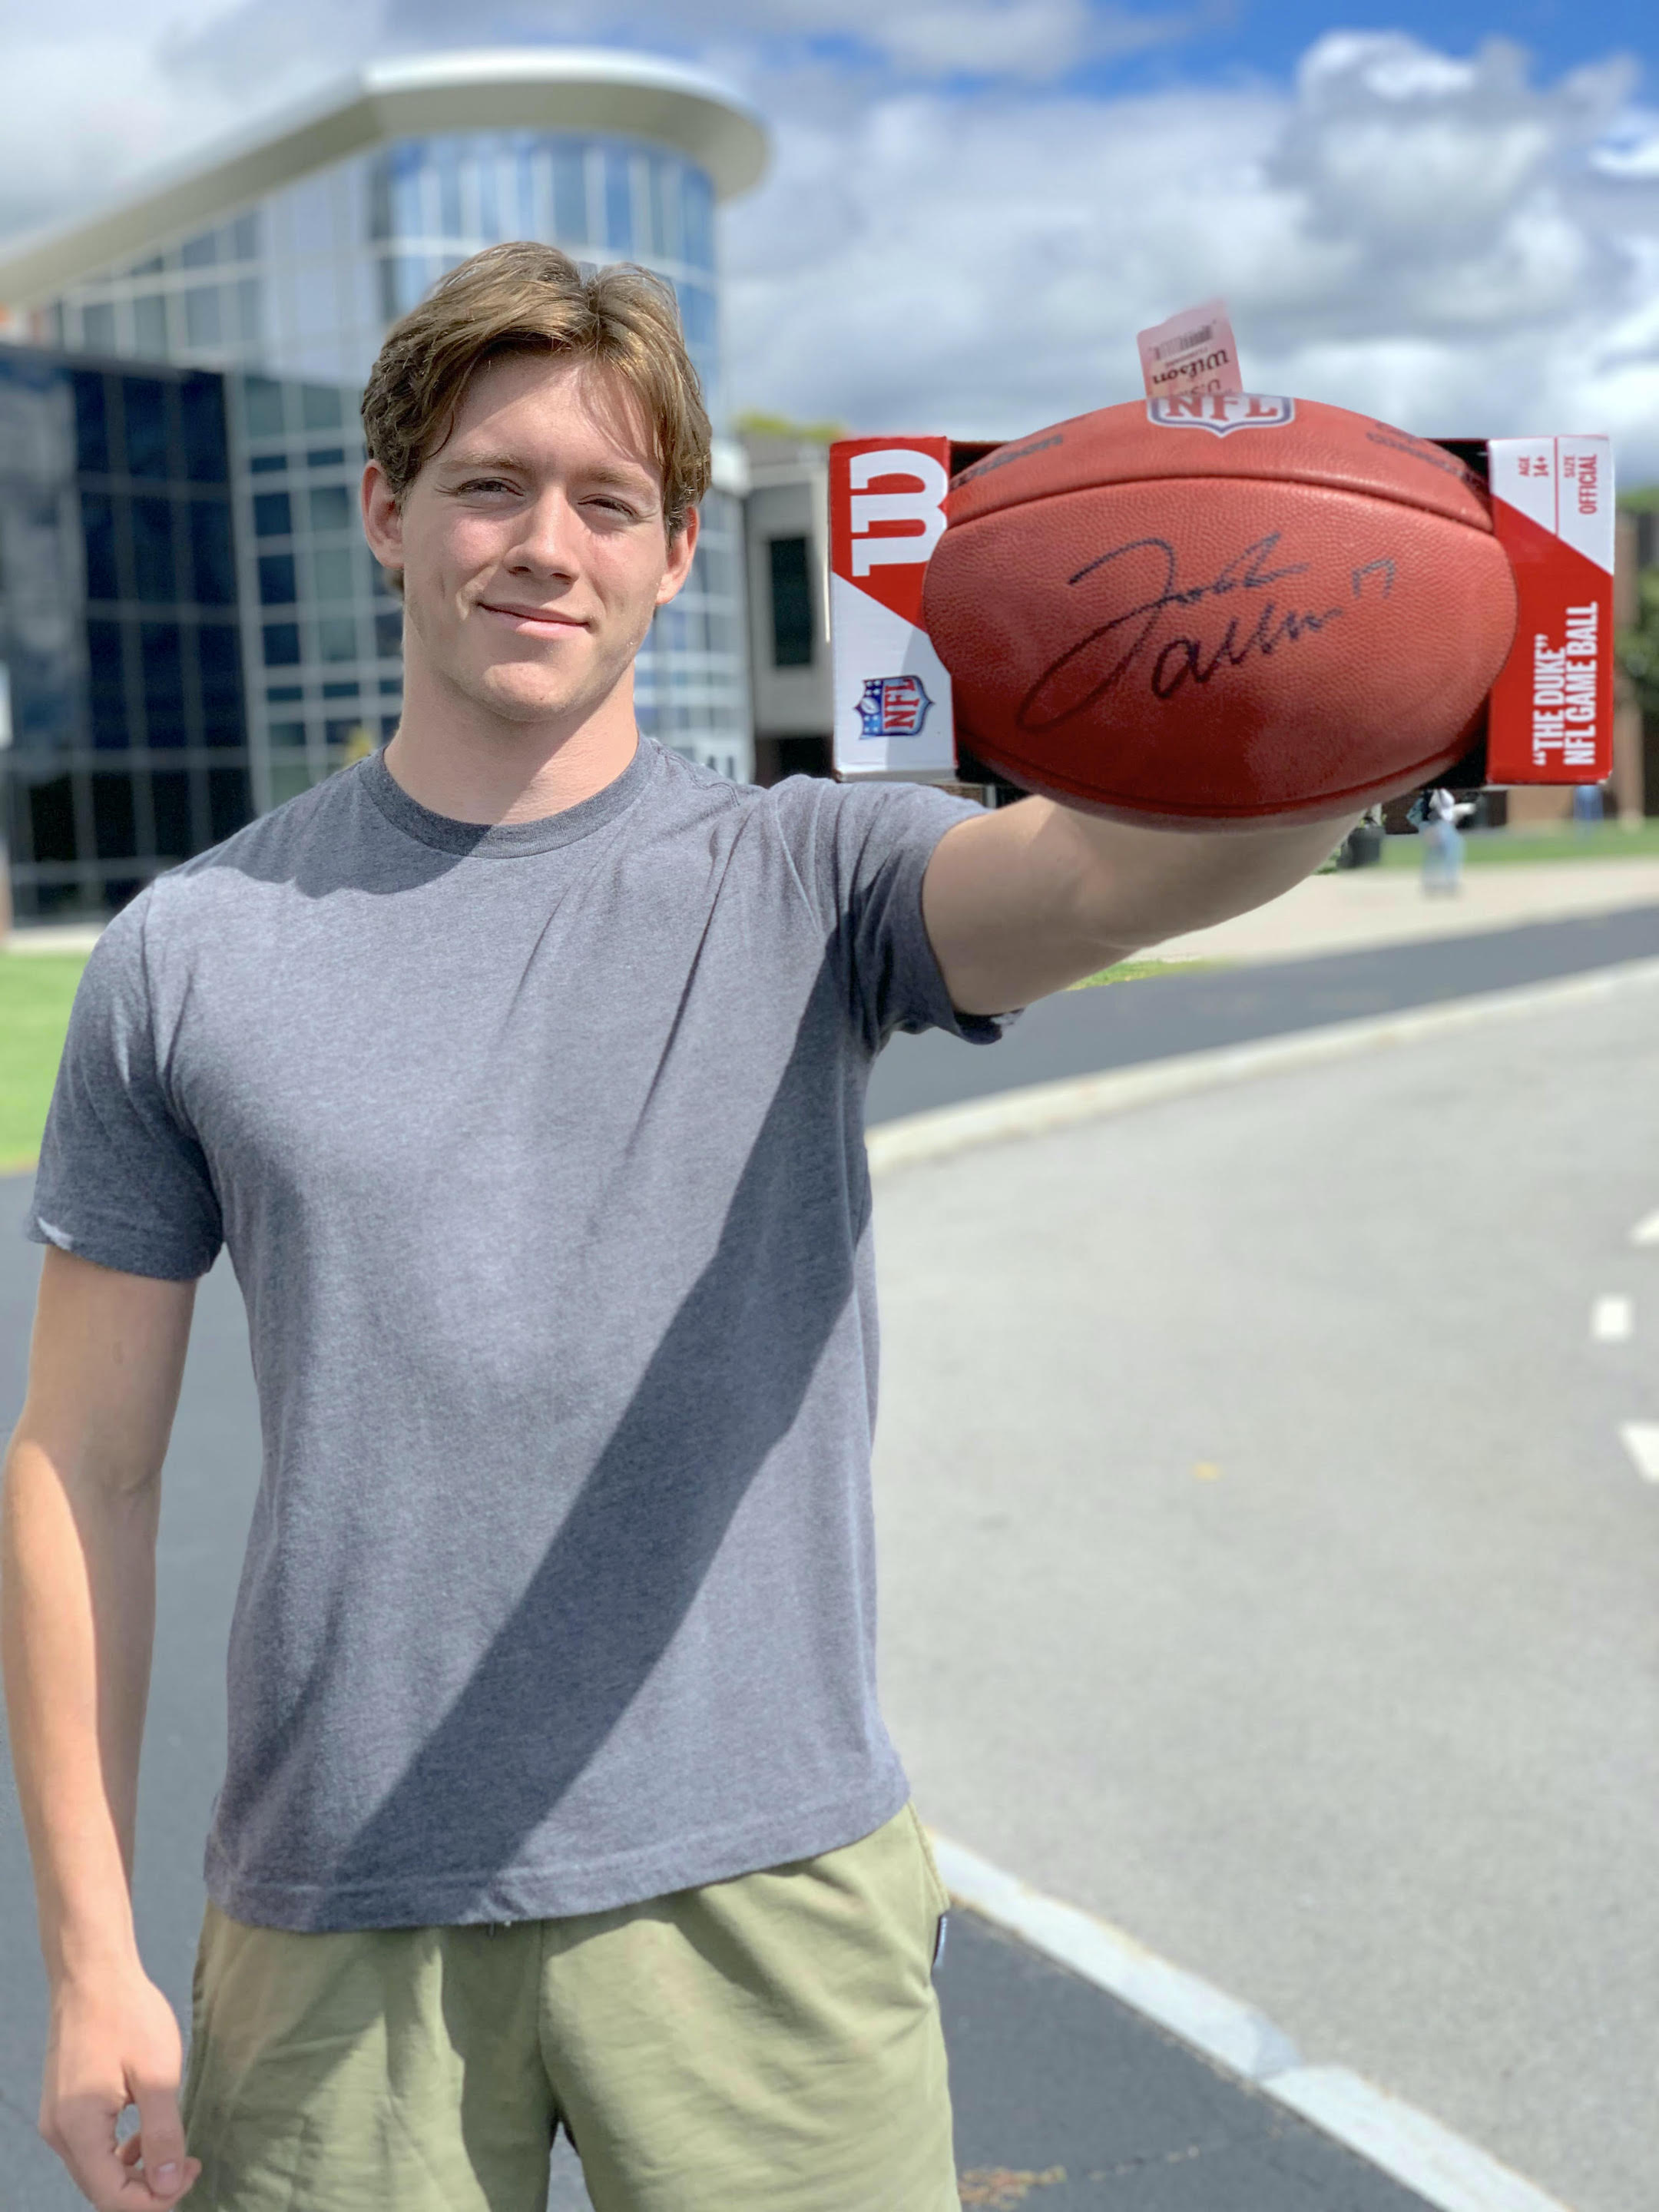 NCCC Distinguished Student Scholarship recipient Evan O'Connor shows off the Josh Allen signed football that will be auctioned off at the NCCC Foundation's scholarship gala.